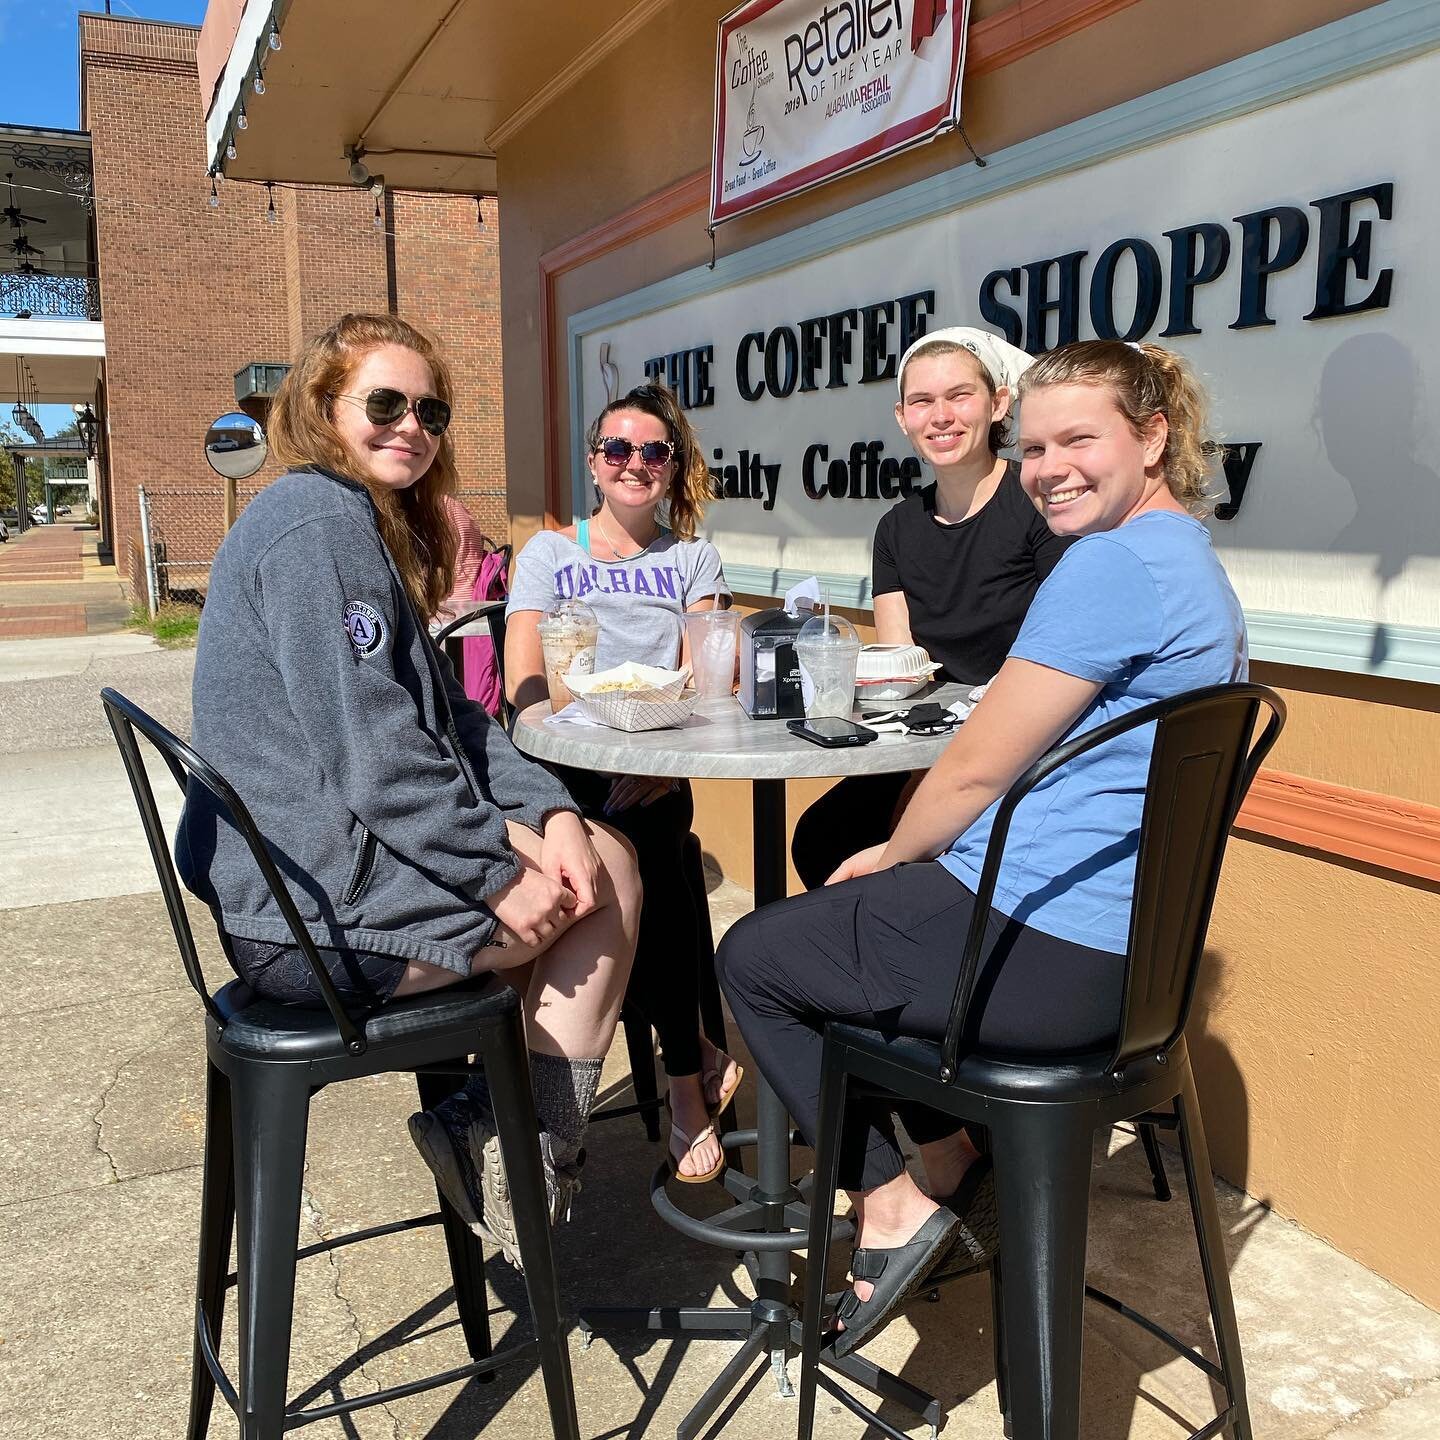 Taking in a bit of history, complimented by great food and great coffee!  Thanks for lunching with The Coffee Shoppe!
#historylivesinselma #thecoffeeshoppeselma #greatfoodgreatcoffee